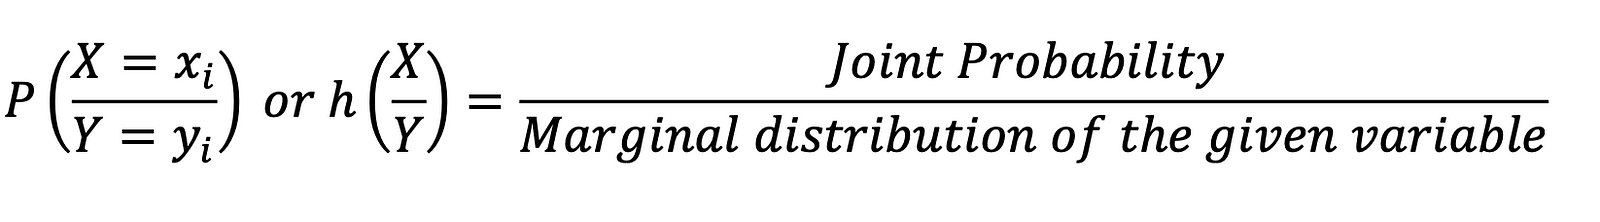 Conditional distribution of x and y